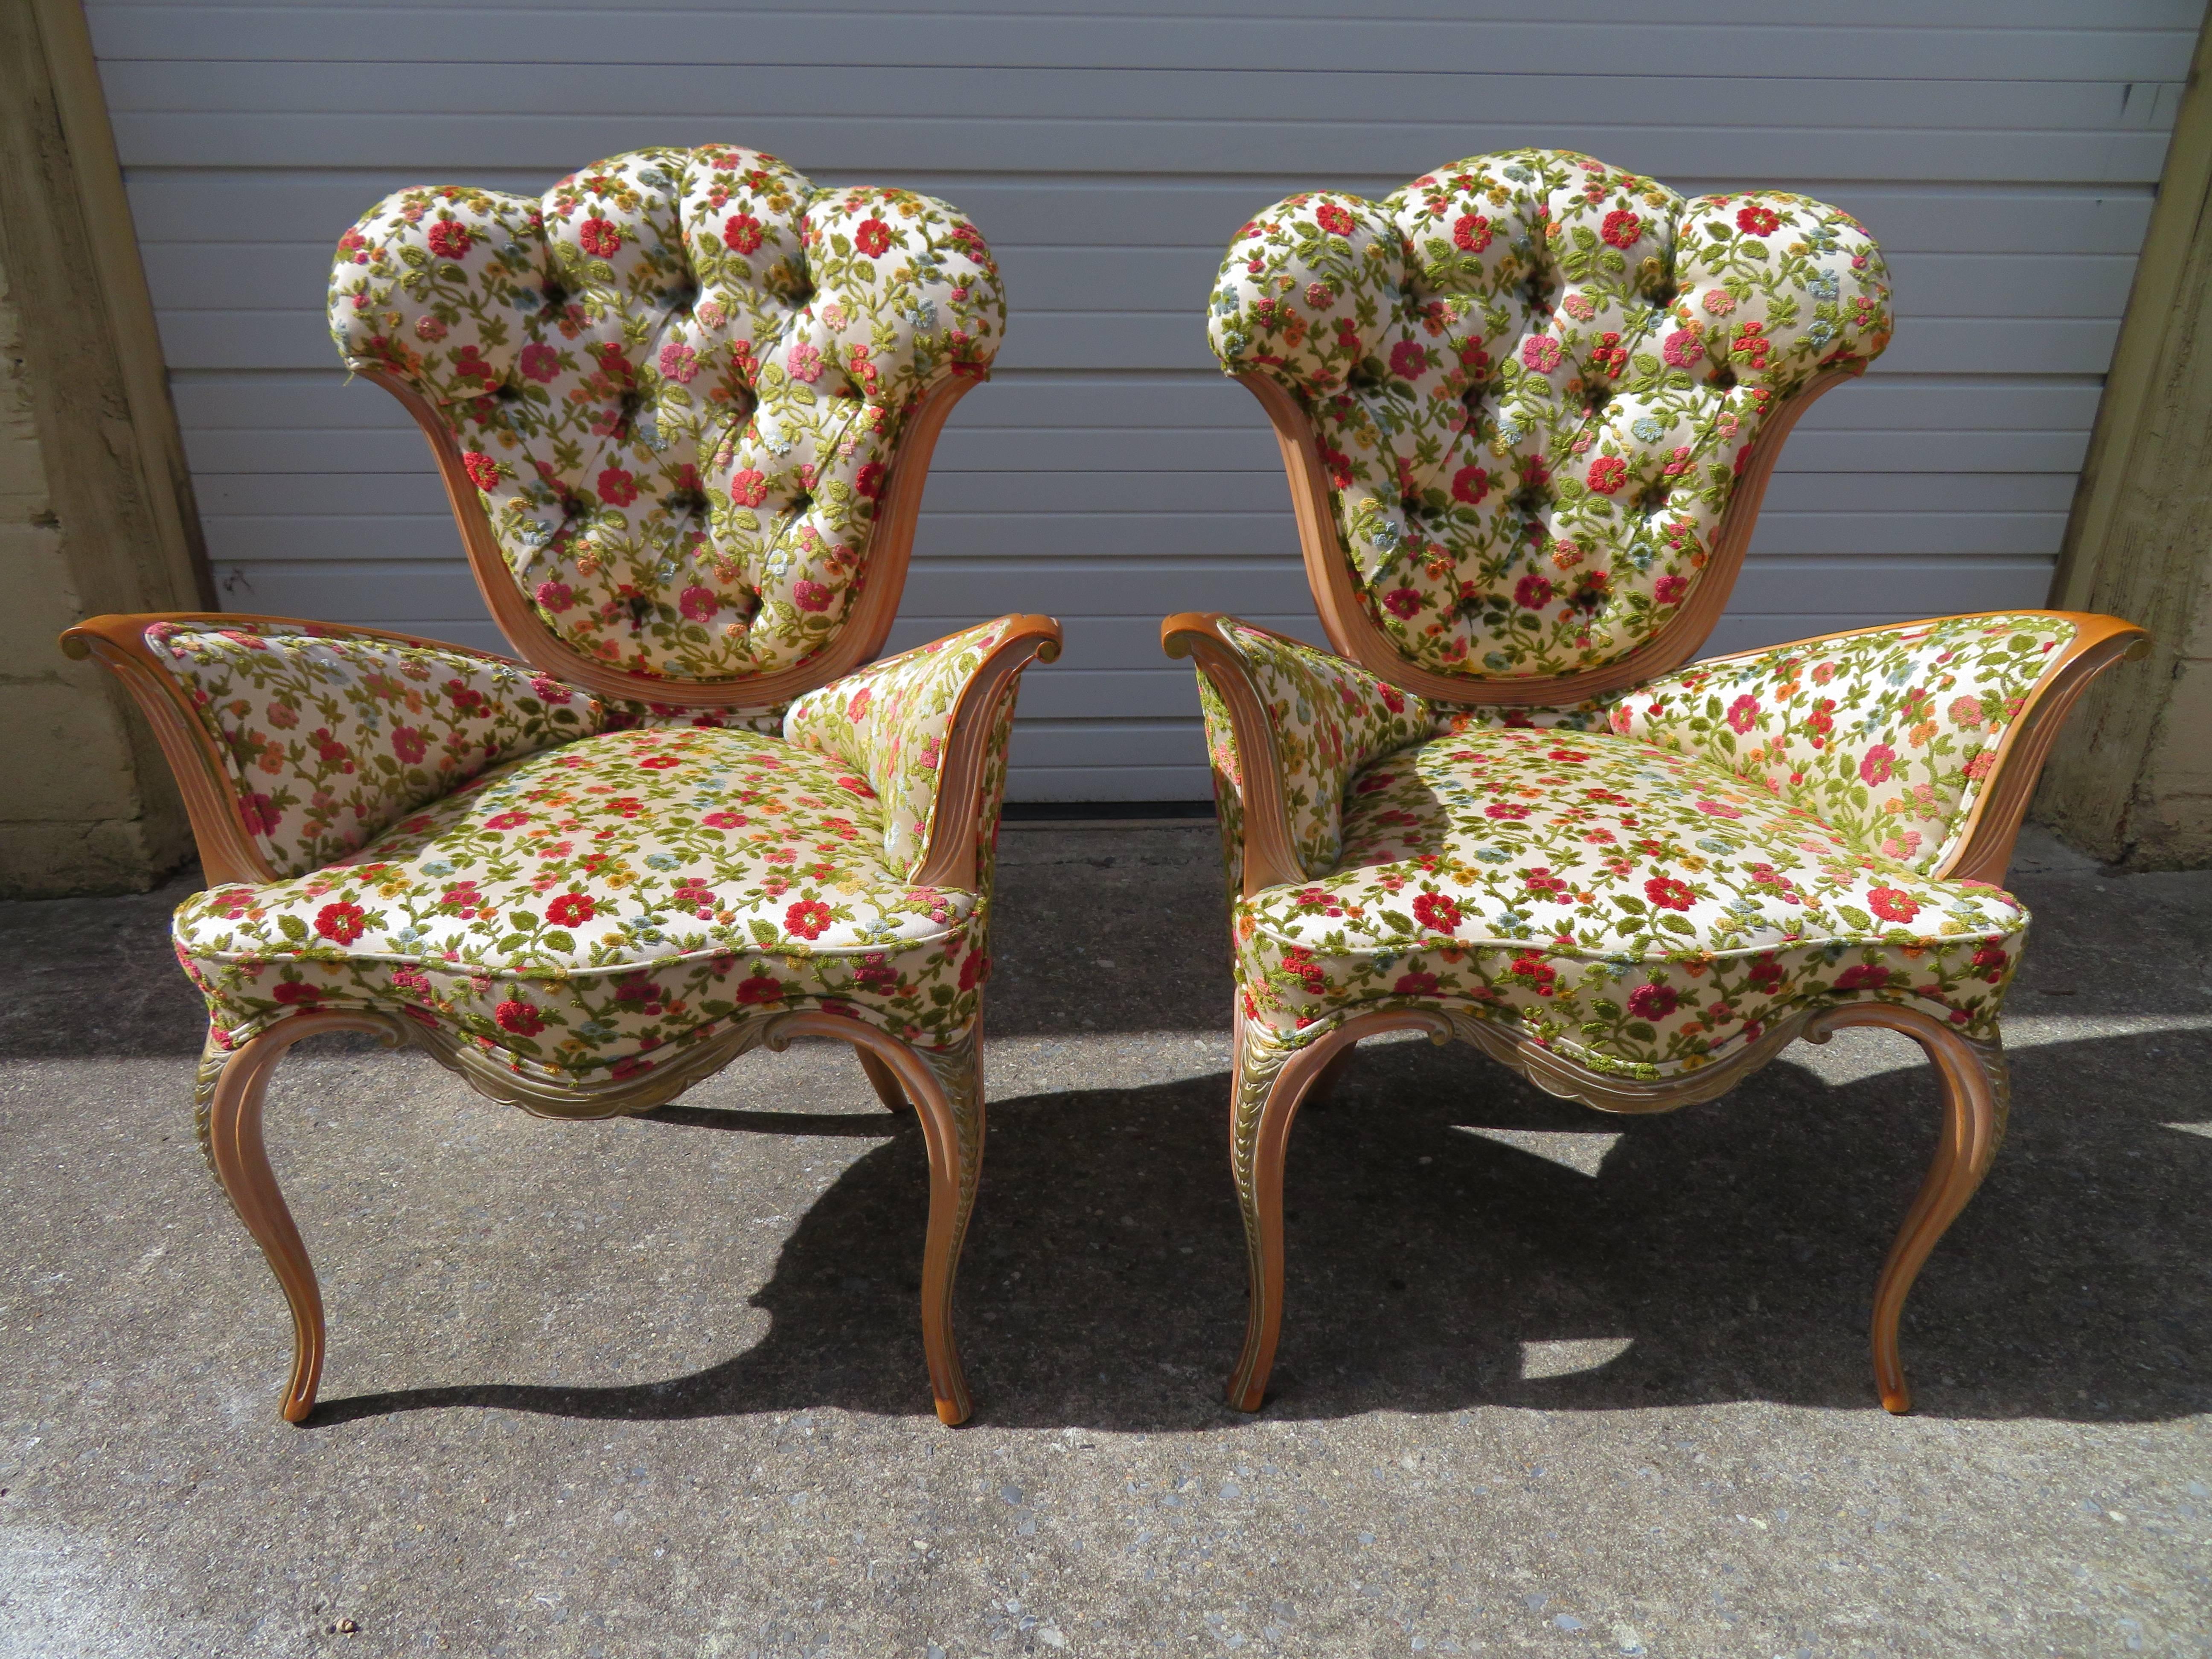 Spectacular pair of Grosfeld House winged armchairs. This pair is in excellent vintage condition retaining their original textured fabric. We love the original floral cut velvet fabric with the ornately carved wooden legs and arms. This pair is